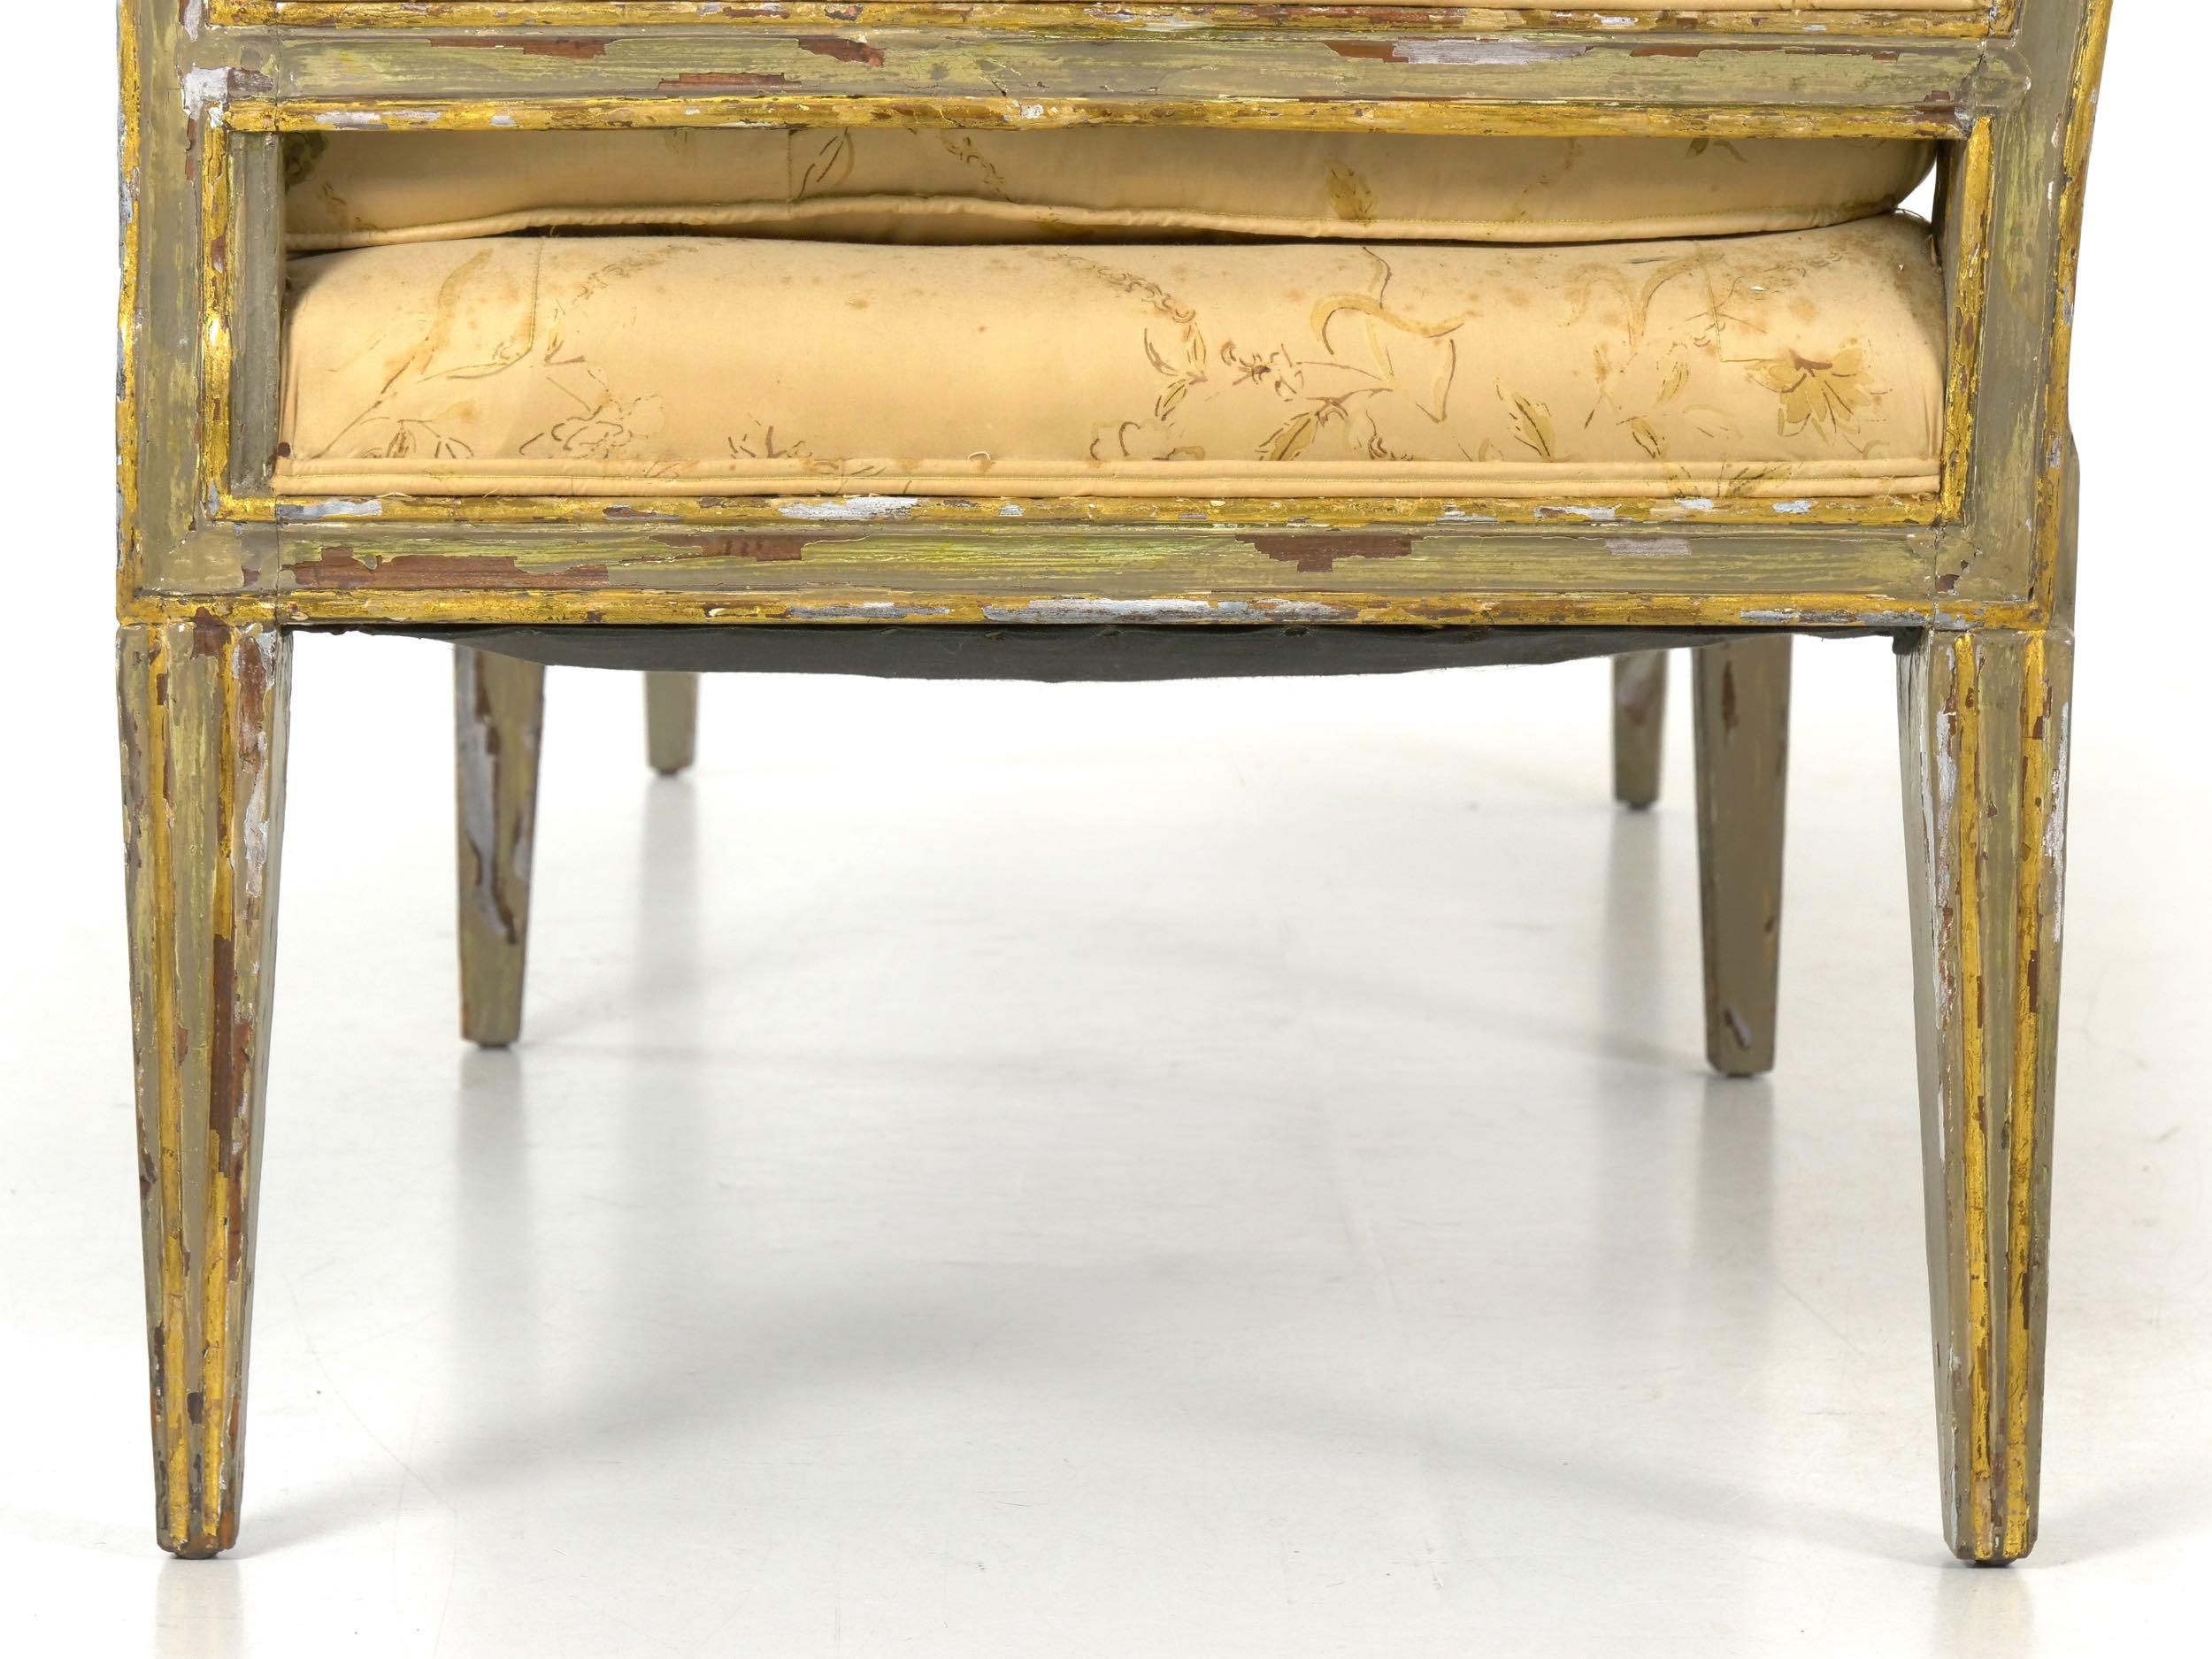 Upholstery Neoclassical Gray Polychrome Painted Settee Sofa Canape, Early 19th Century